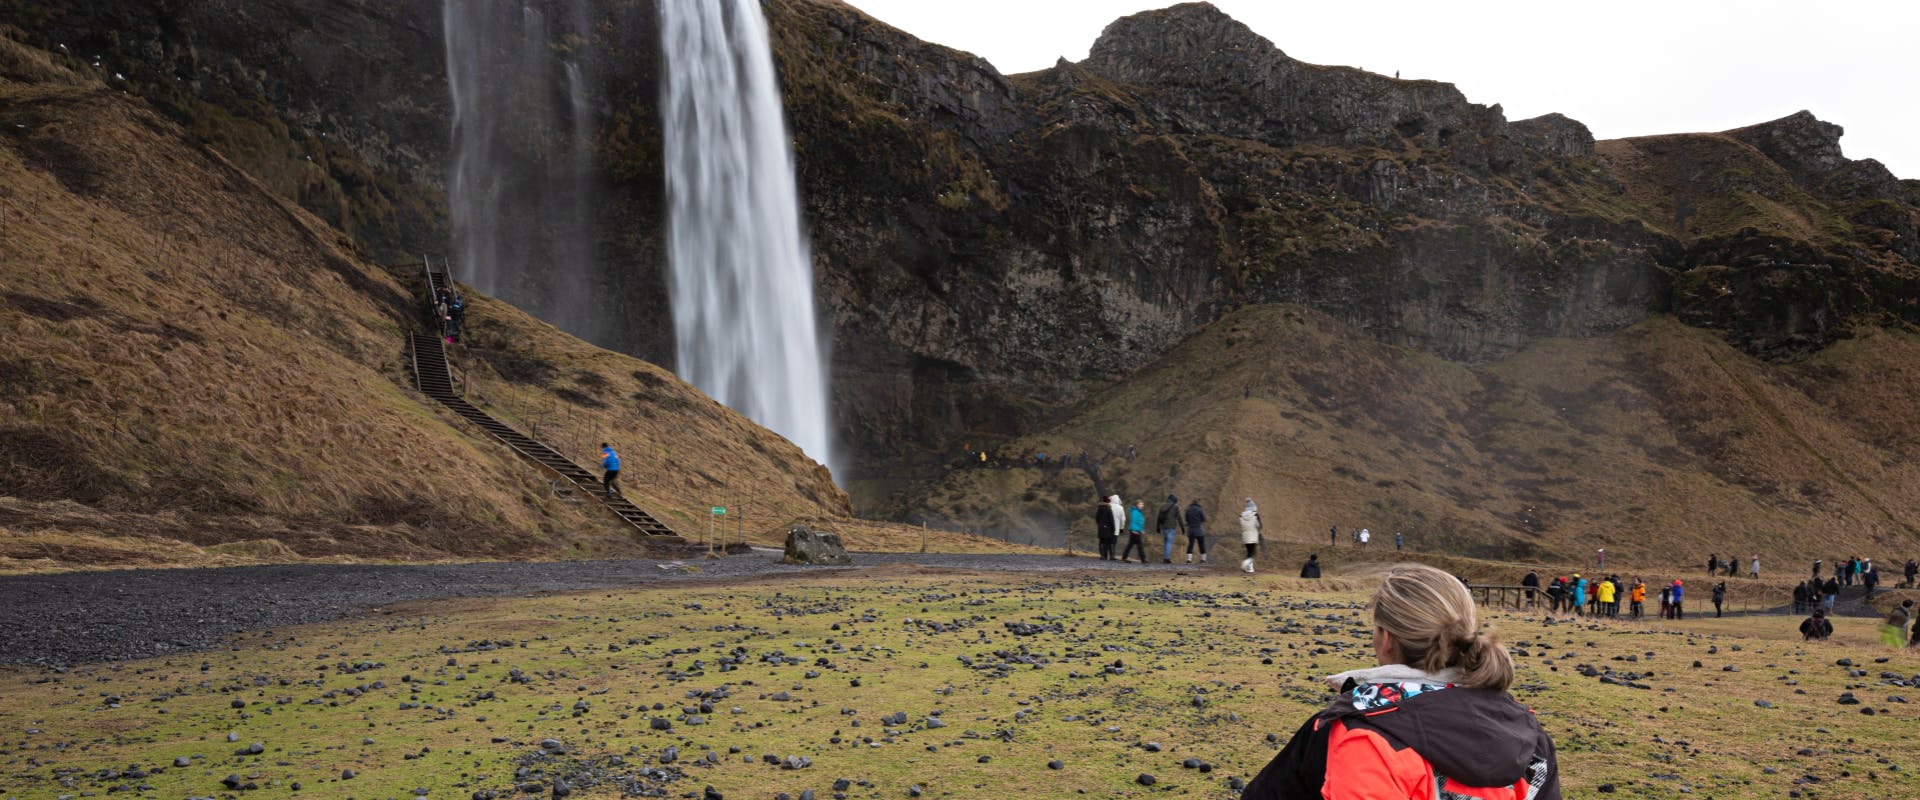 solo female traveler looking at a huge waterfall in Iceland surrounded by black volcanic hills